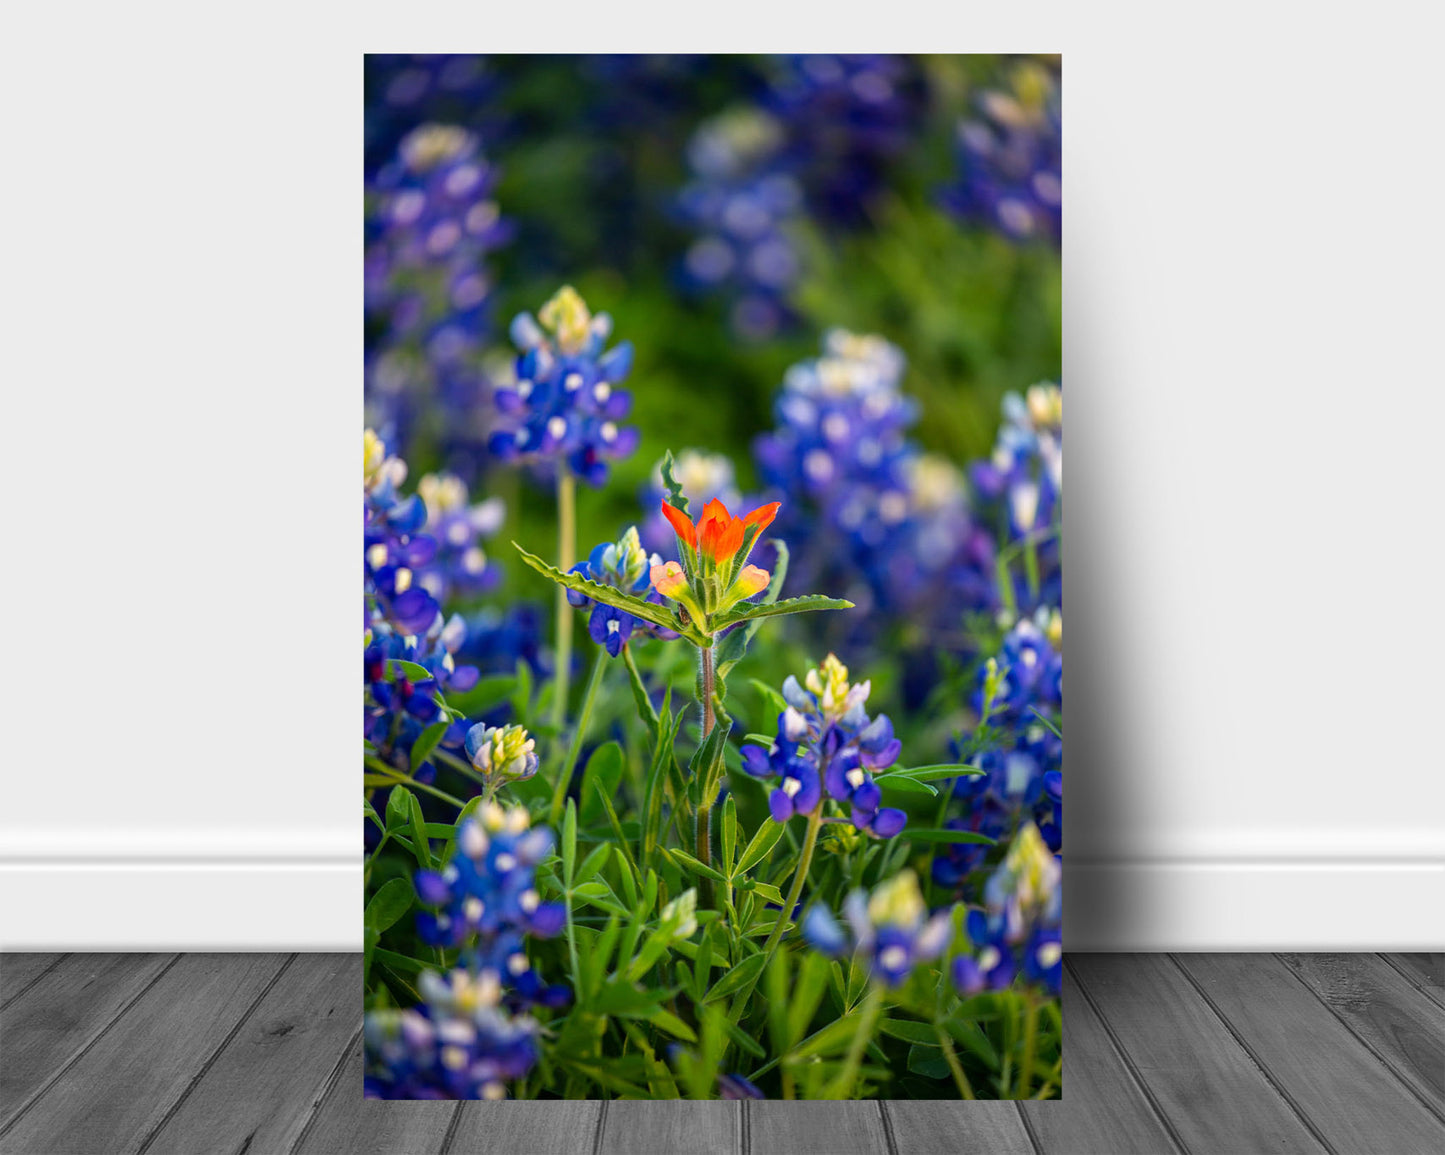 Vertical floral metal print on aluminum of a solitary Indian paintbrush wildflower standing out in bluebonnets on a spring day in Texas by Sean Ramsey of Southern Plains Photography.